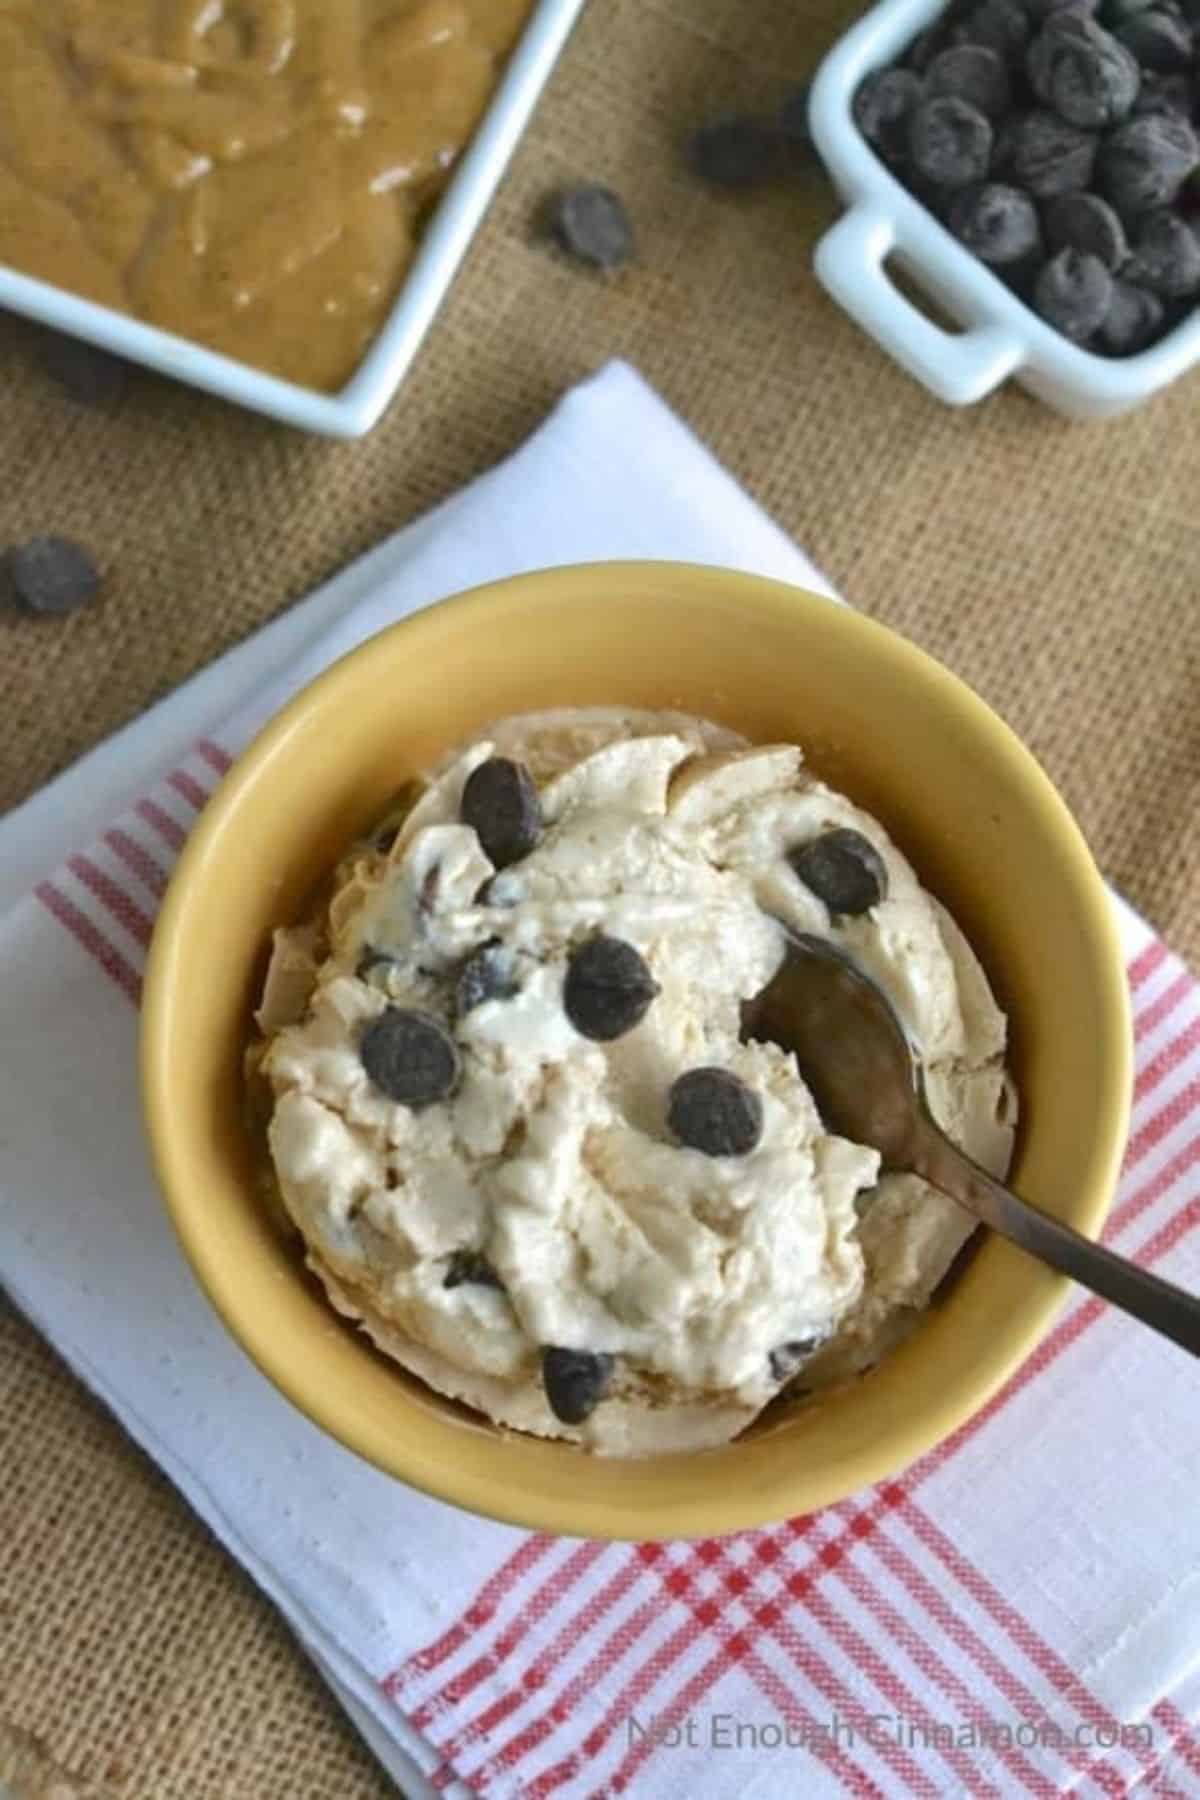 Bowl of reese's peanut butter cup frozen yogurt with a spoon on a table.